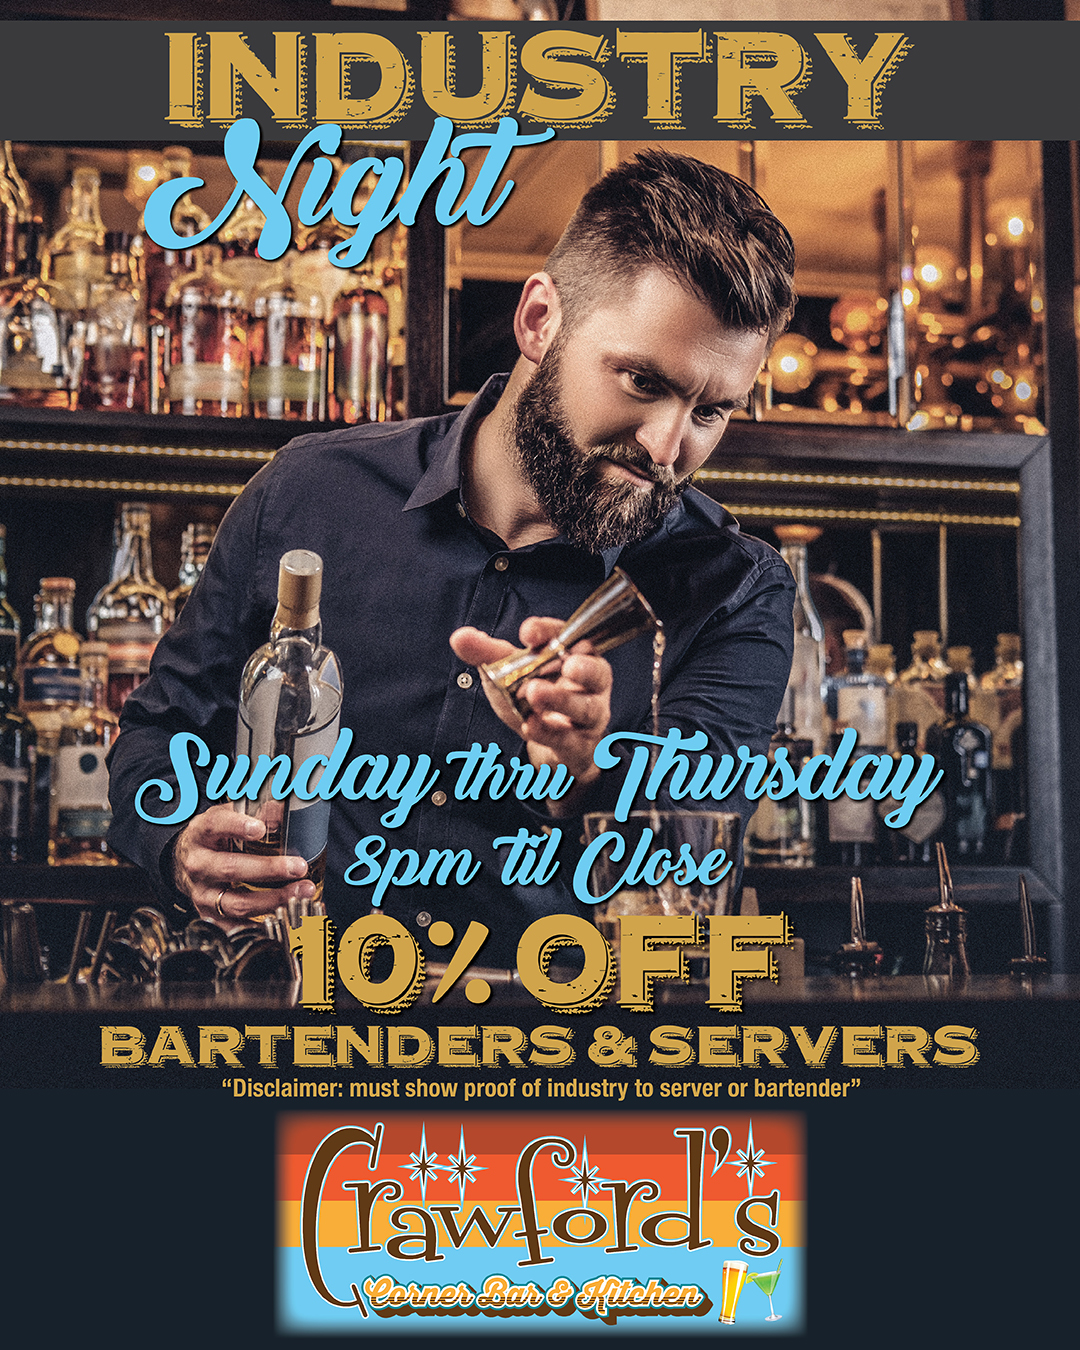 A bartender pouring a drink behind a bar. Text on the image reads, "Industry Night, Sunday thru Thursday, 8pm 'til Close. 10% Off for Bartenders & Servers," with a logo at the bottom.